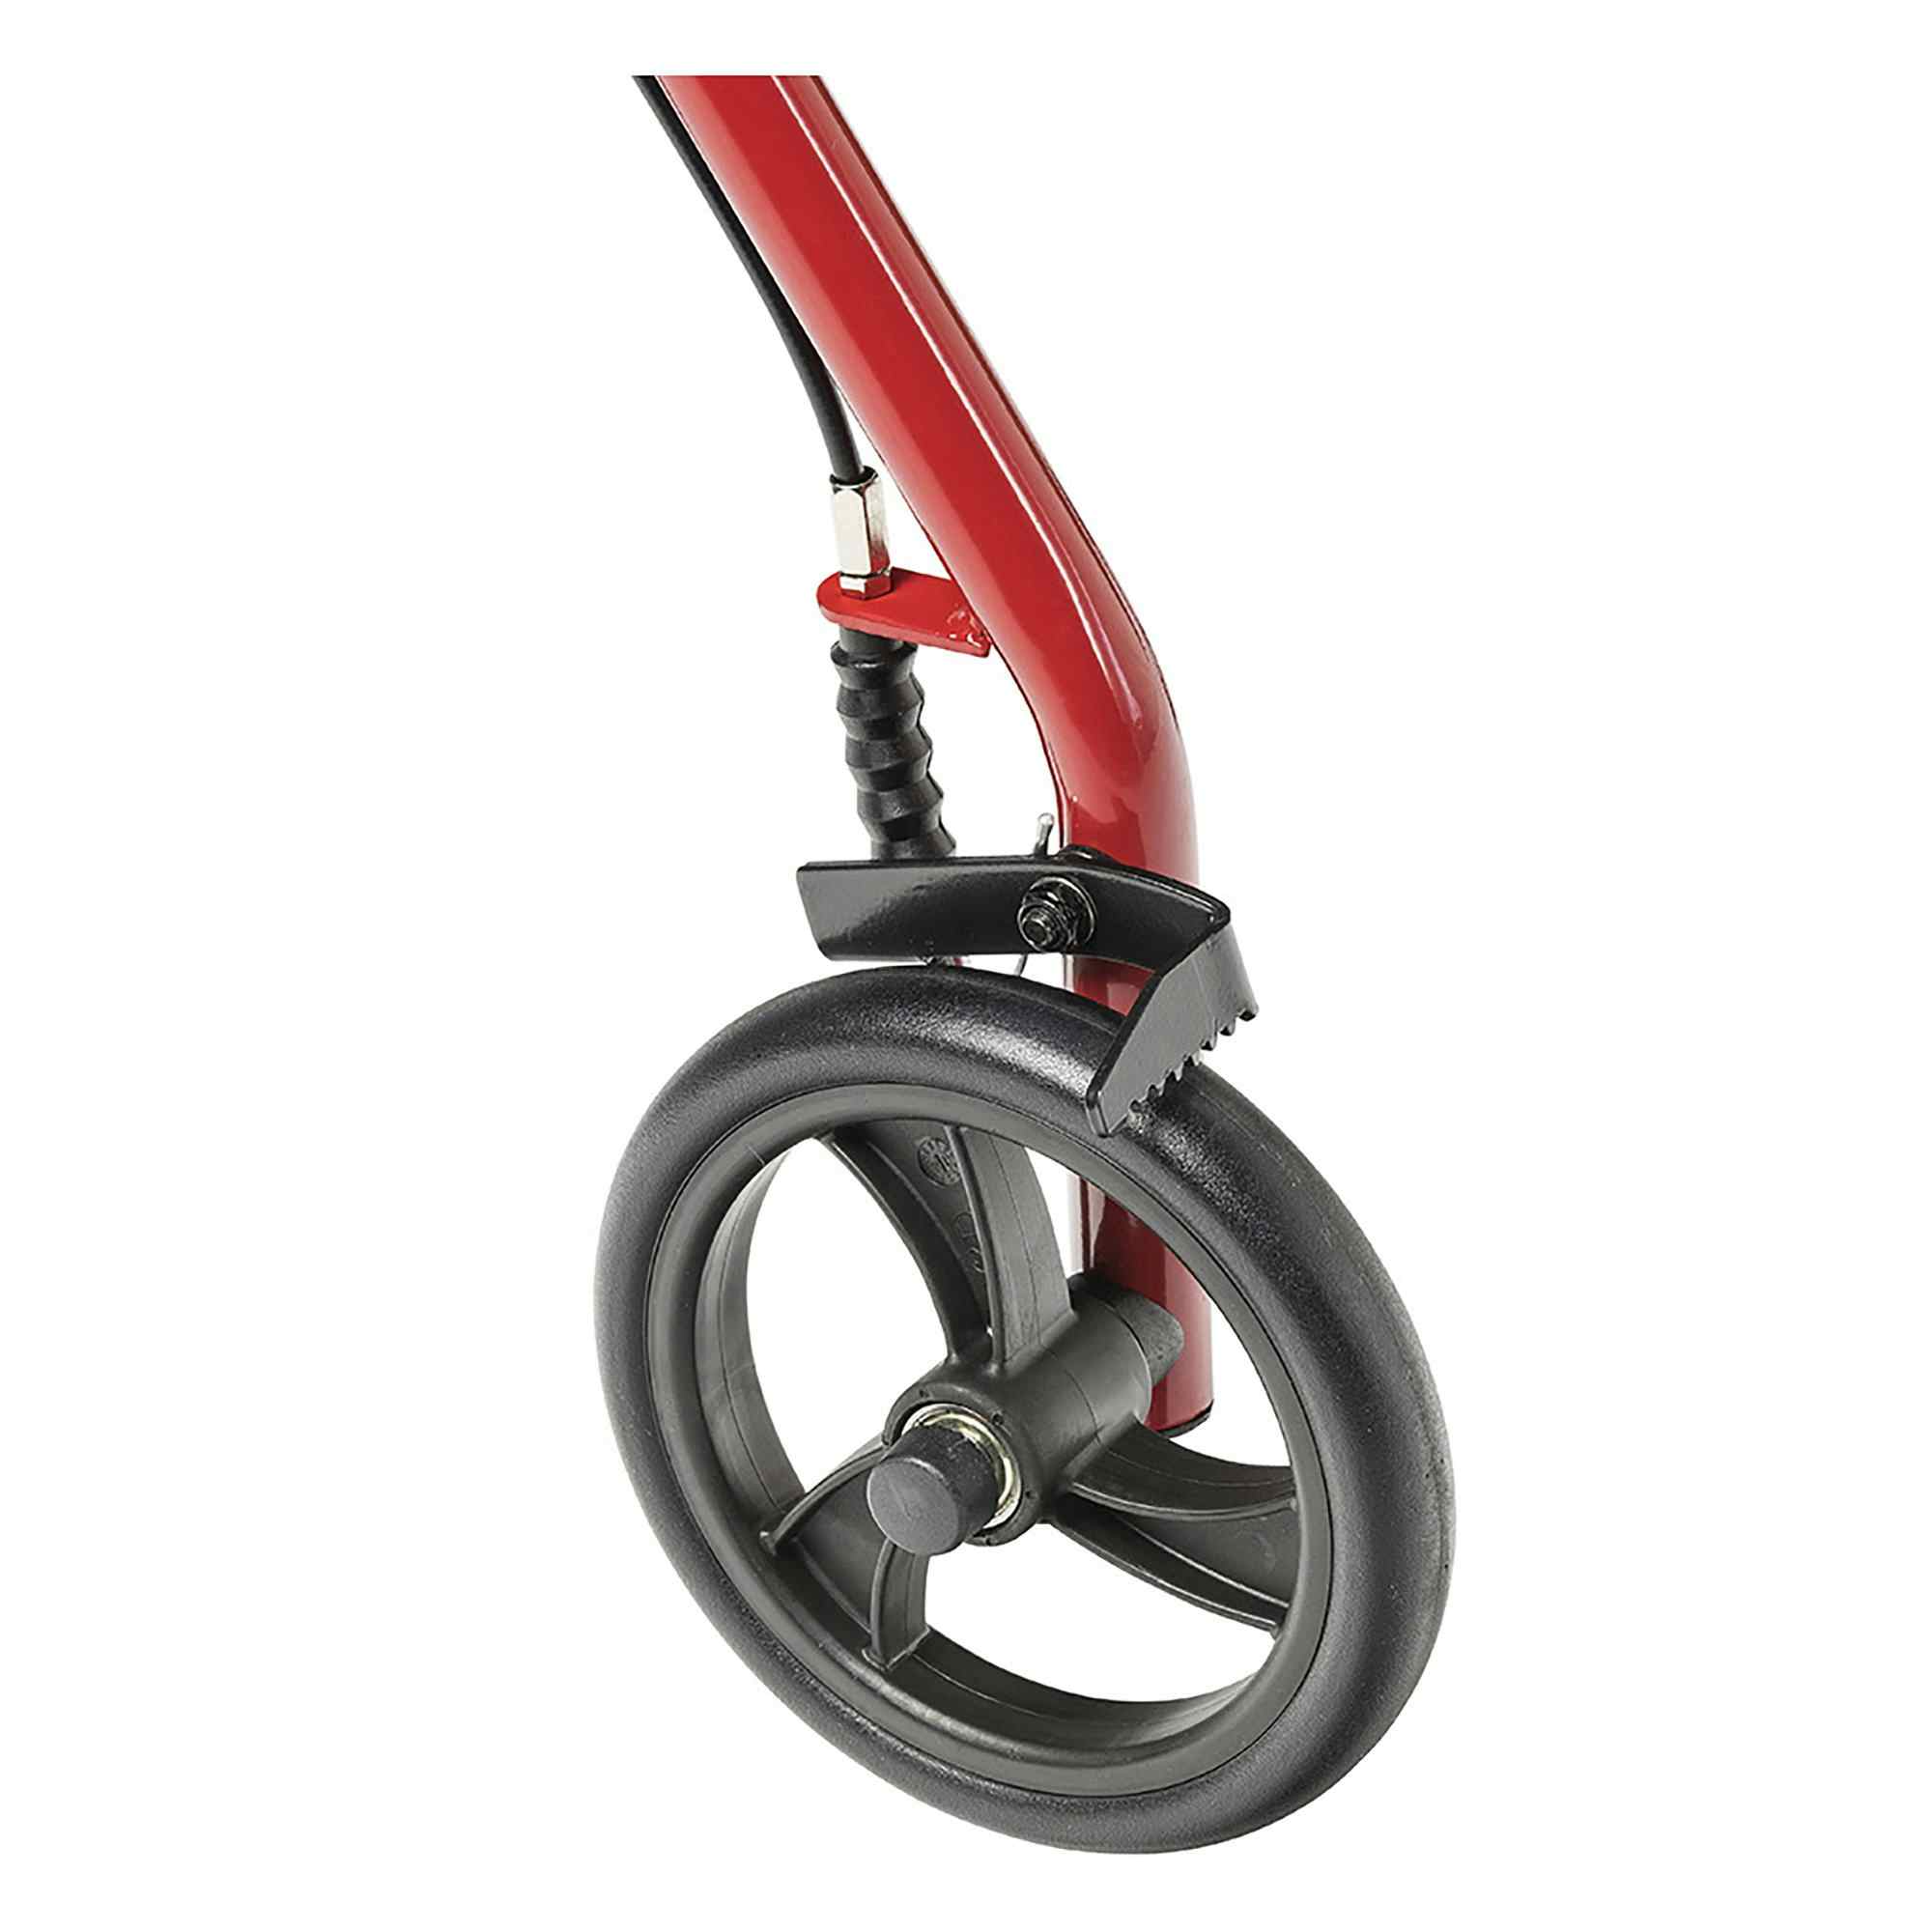 drive Adjustable Height Rollator, 6" Casters, R800RD, Red - 1 Each